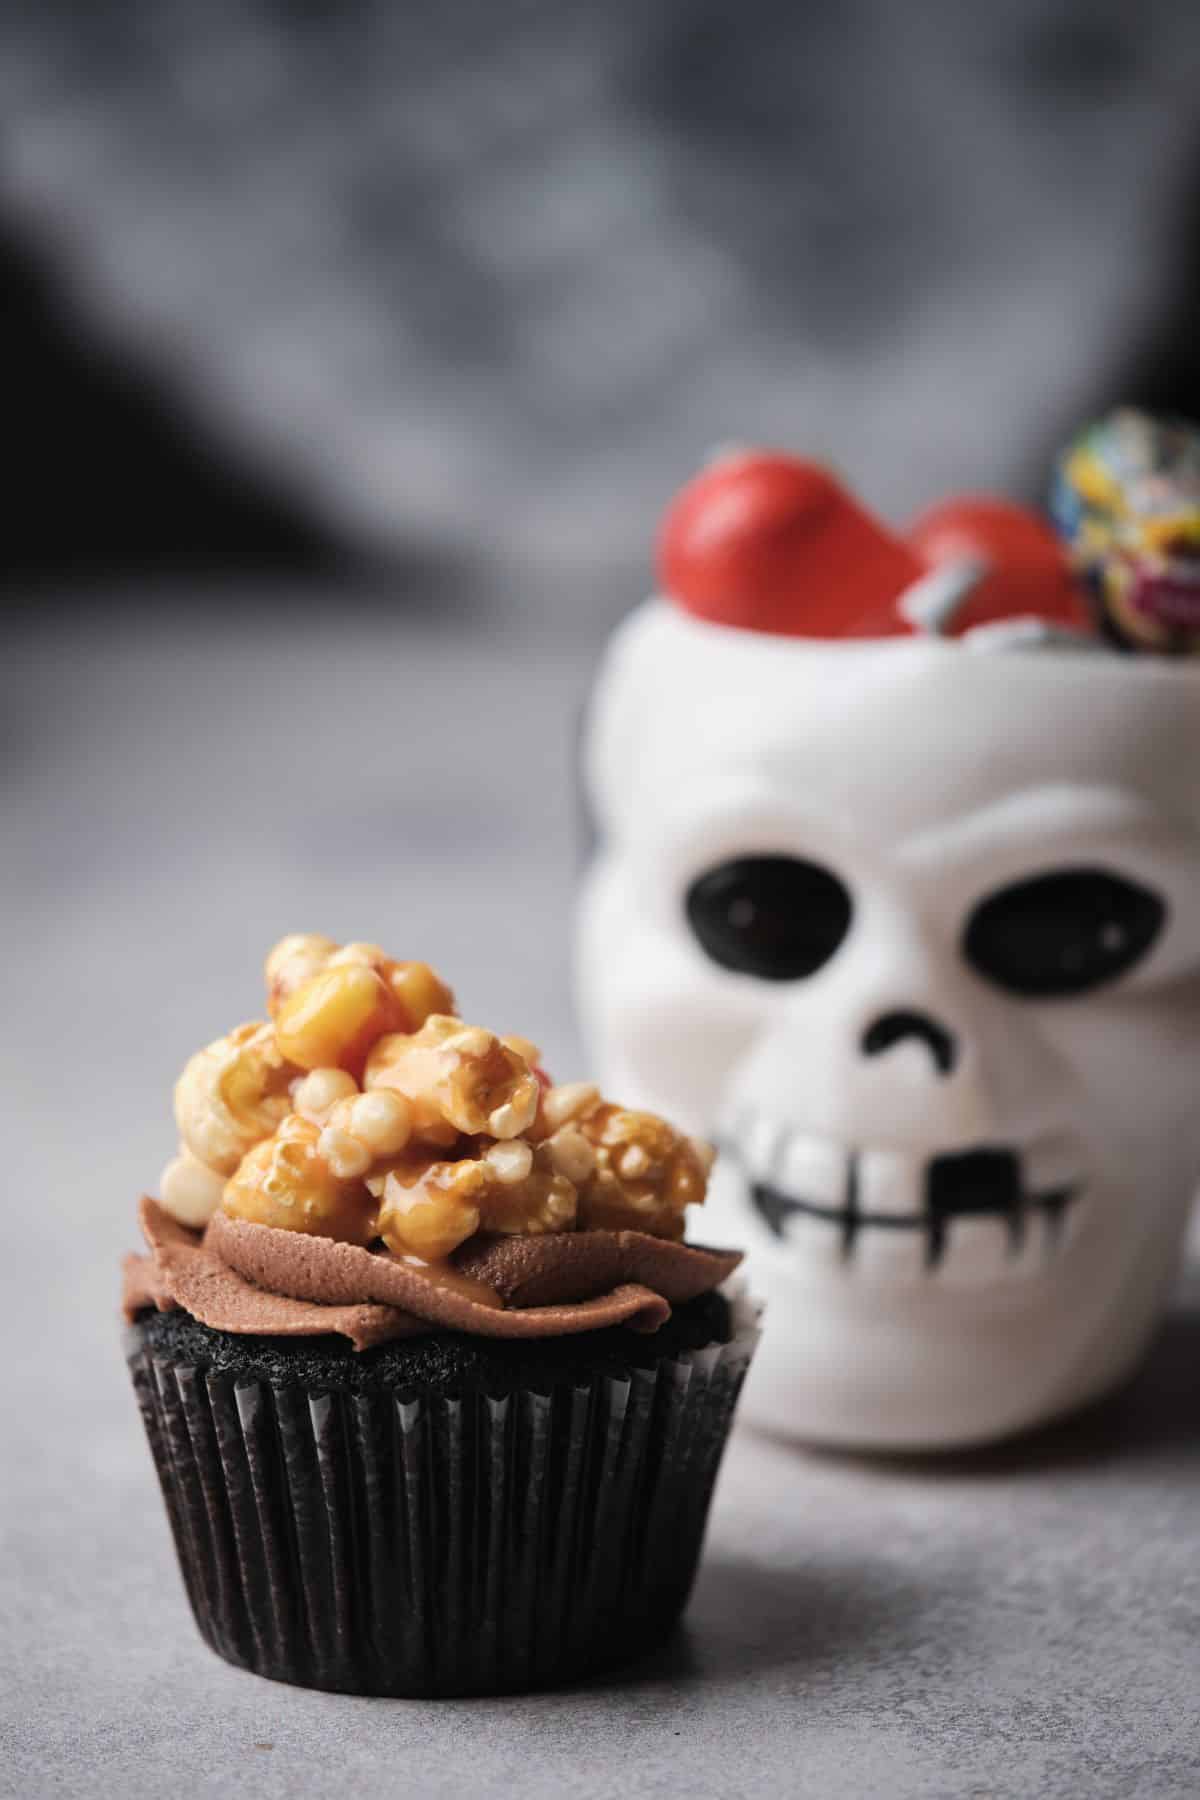 A Halloween Caramel filled chocolate cupcake topped with Caramel corn and Halloween decorations in the background.